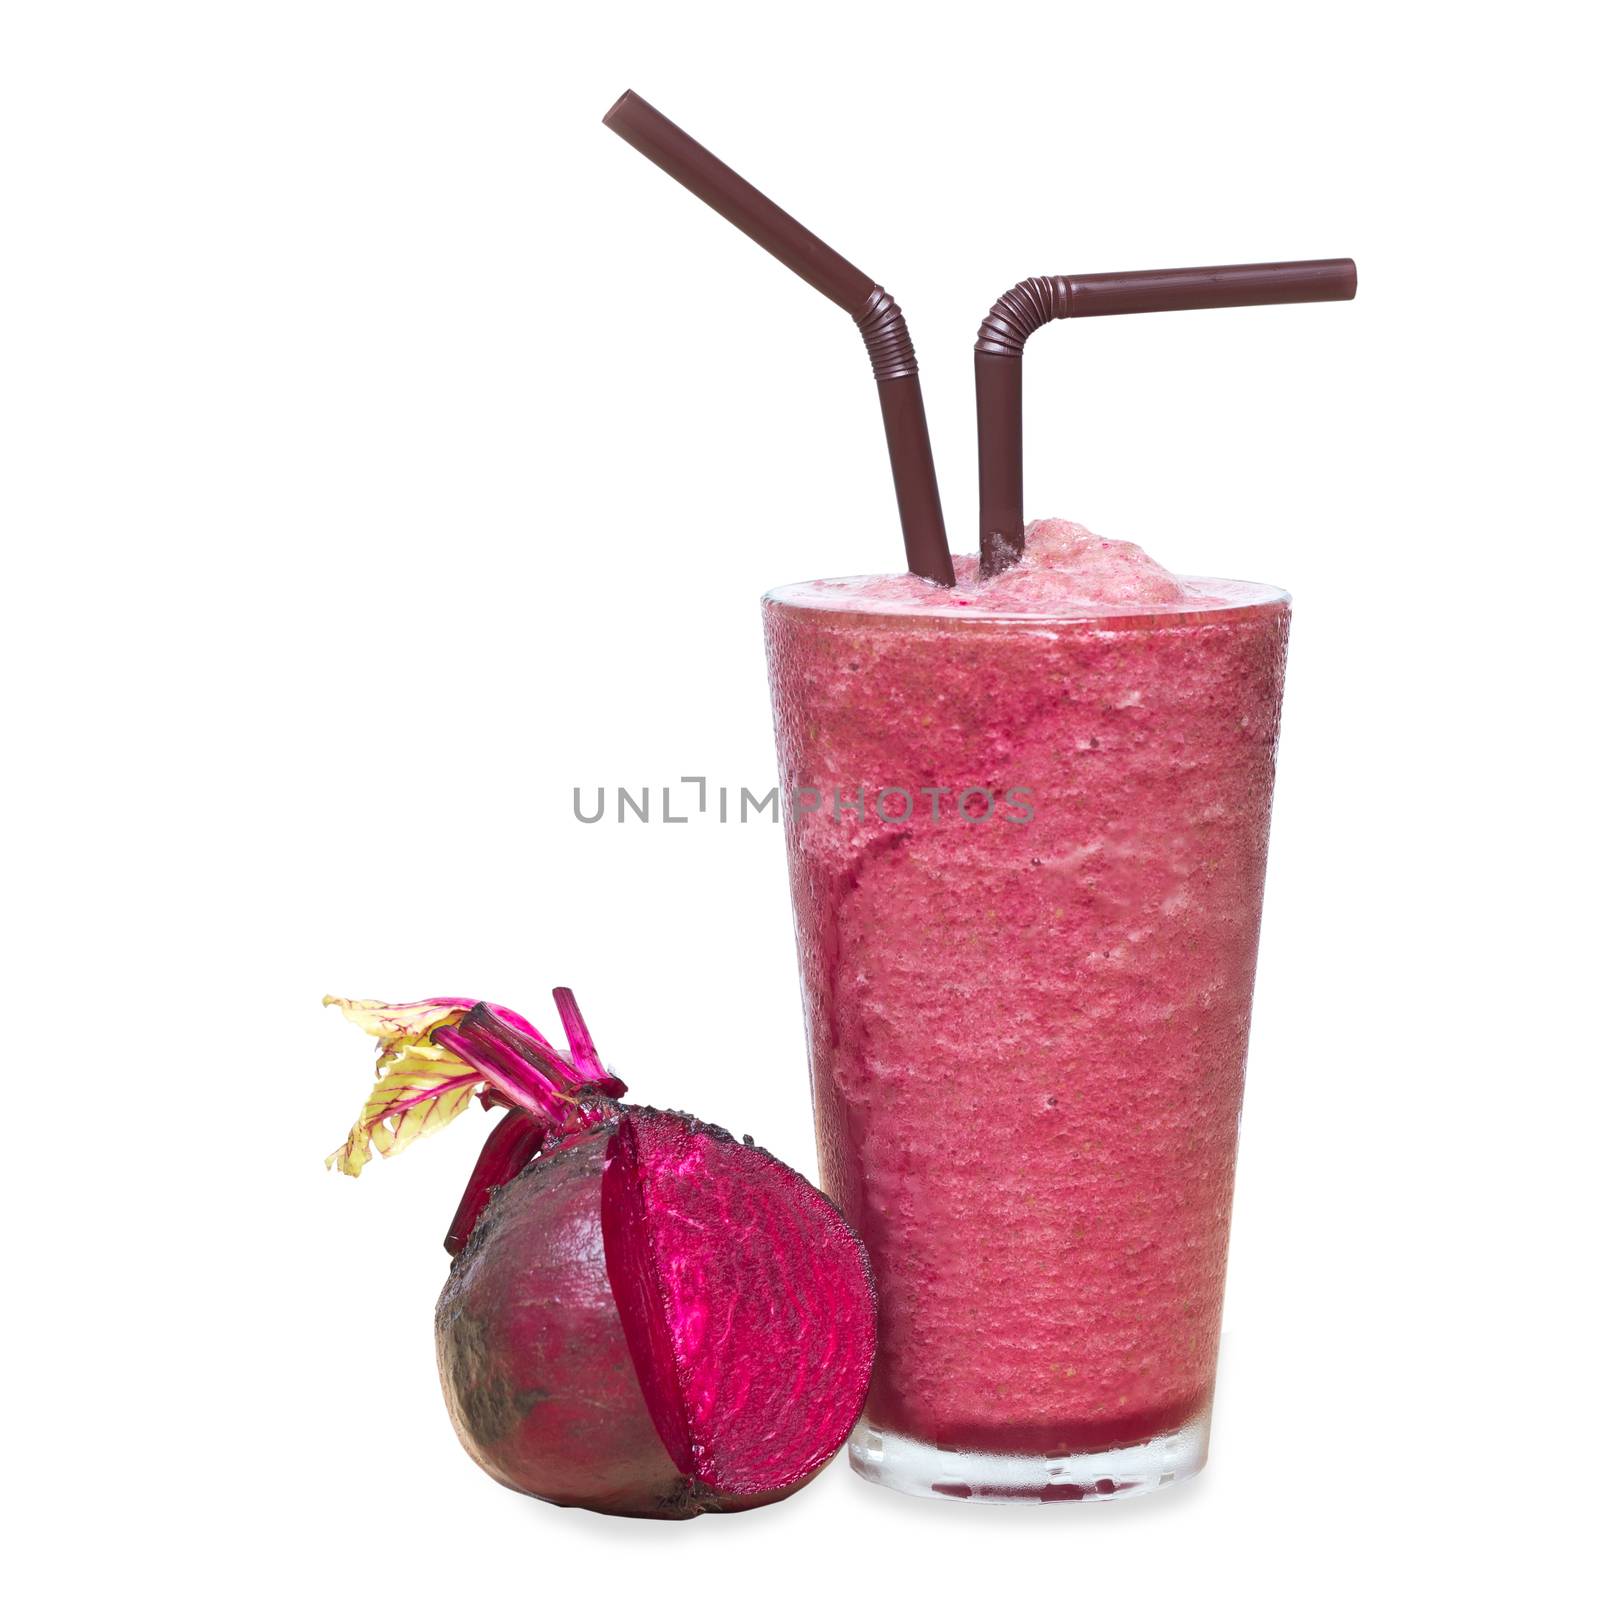 Smoothie Beetroot juice, Healthy drink on white background with clipping path